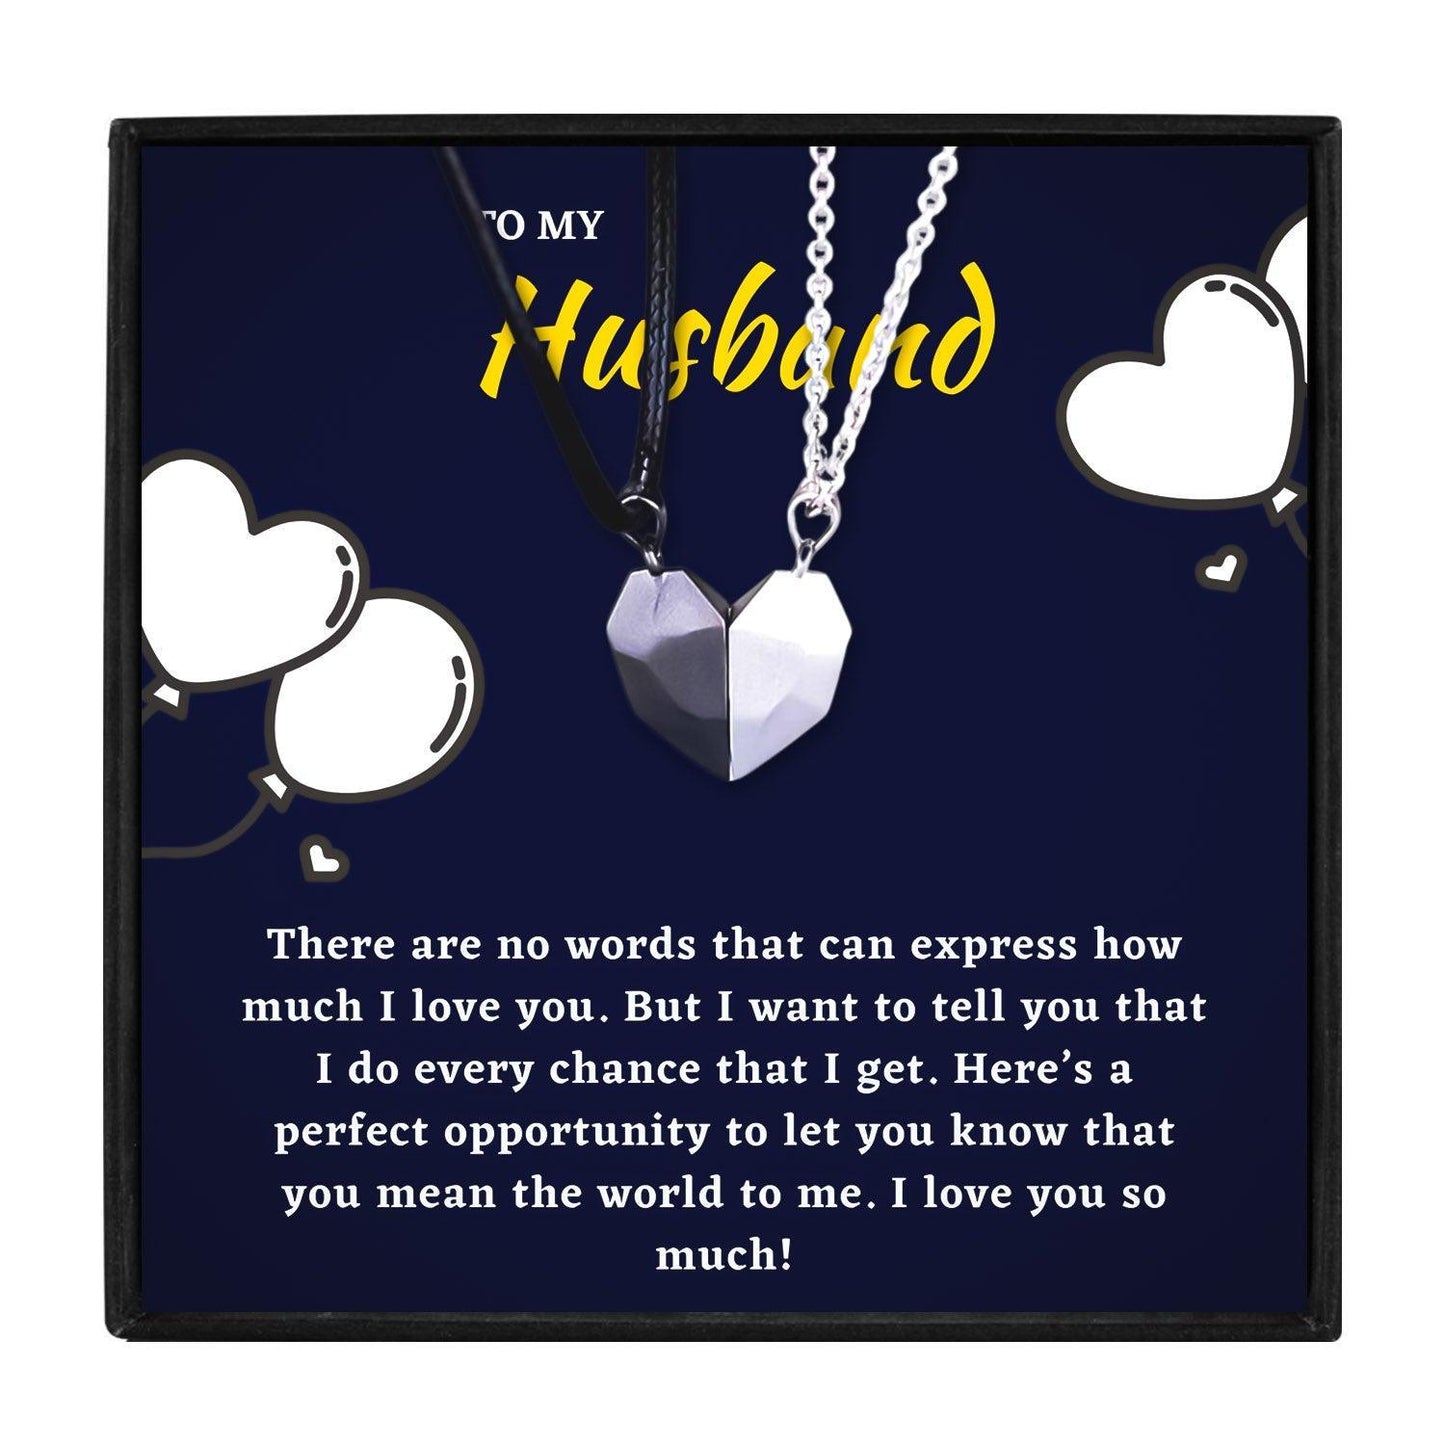 Matching Relationship Necklaces for Husband From Wife in 2023 | Matching Relationship Necklaces for Husband From Wife - undefined | birthday gift for hubby, birthday ideas for husband, husband gift ideas, Matching Relationship Necklaces for Husband, My Husband Necklace | From Hunny Life | hunnylife.com